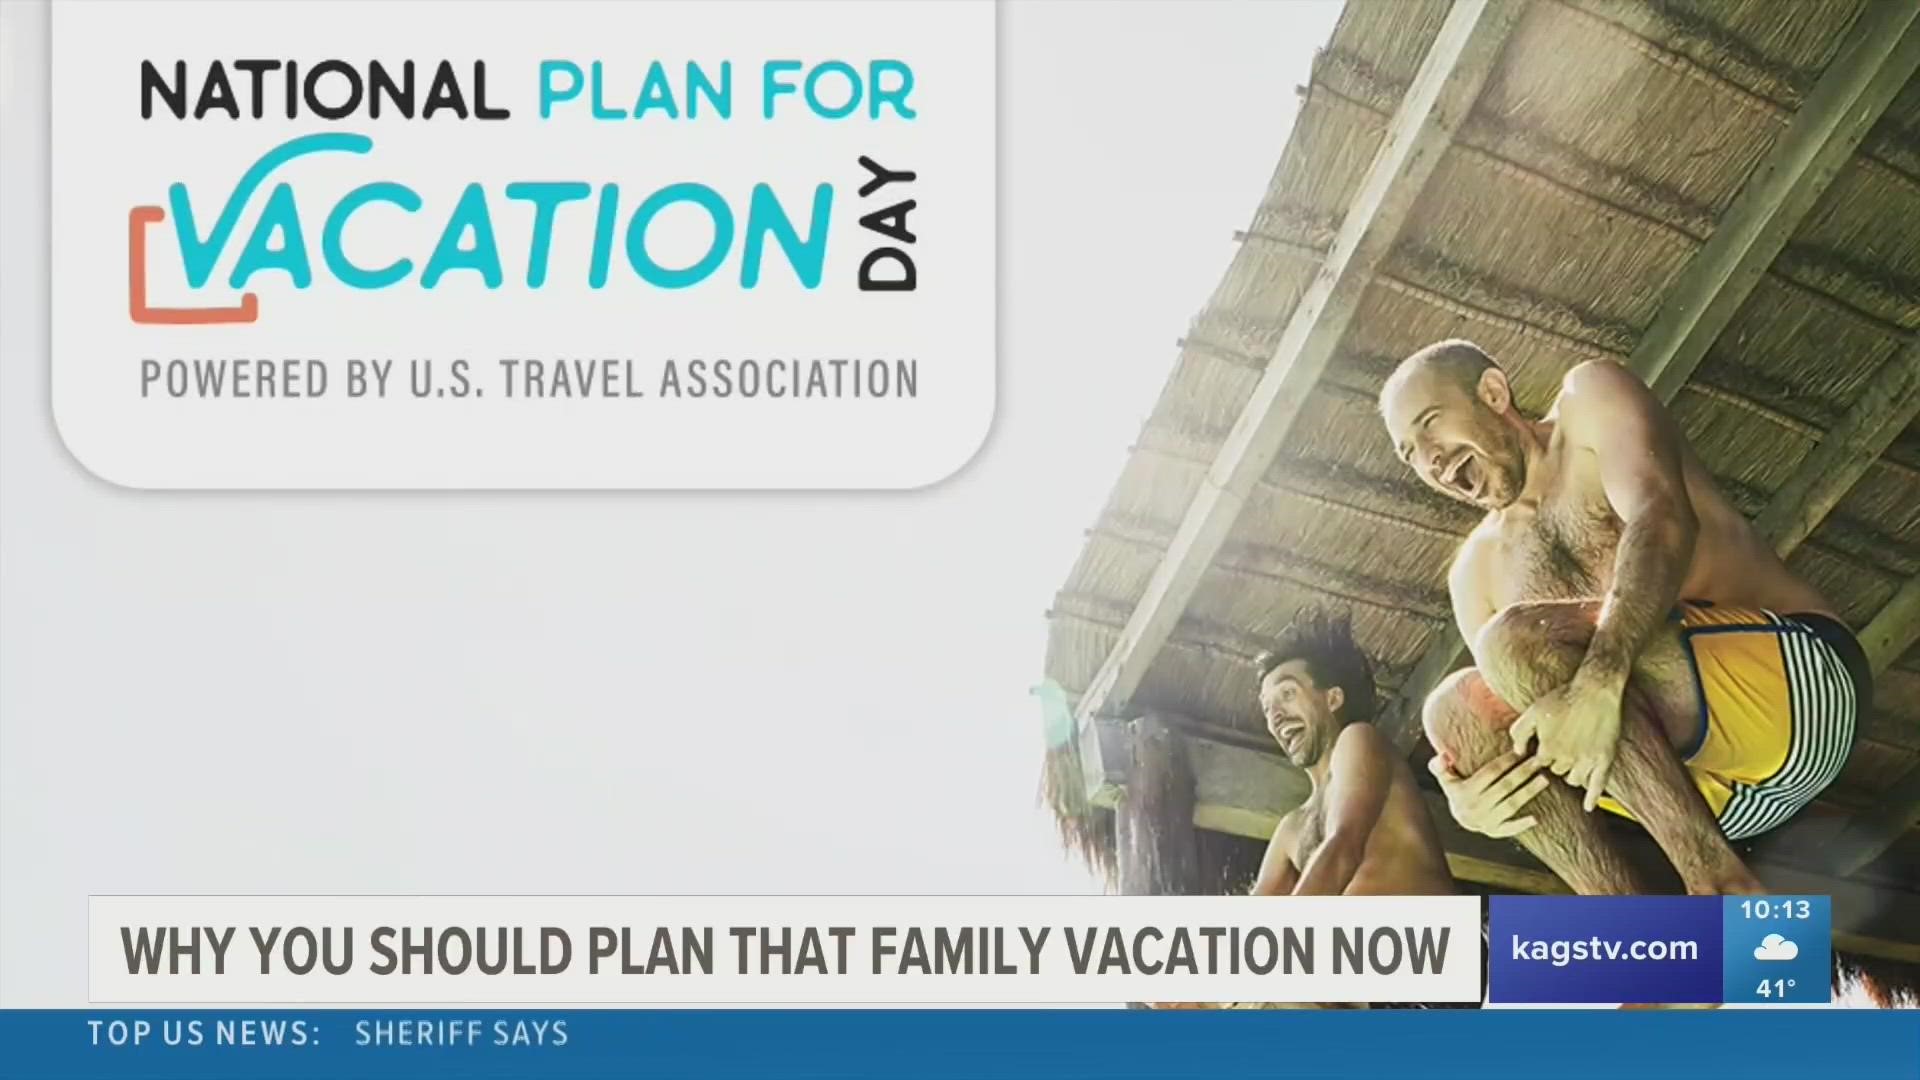 TopCashBack consumer expert Rebecca Gramuglia shared some tips ahead of National Plan Your Vacation Day on Jan. 31 to keep your vacation plans intact.